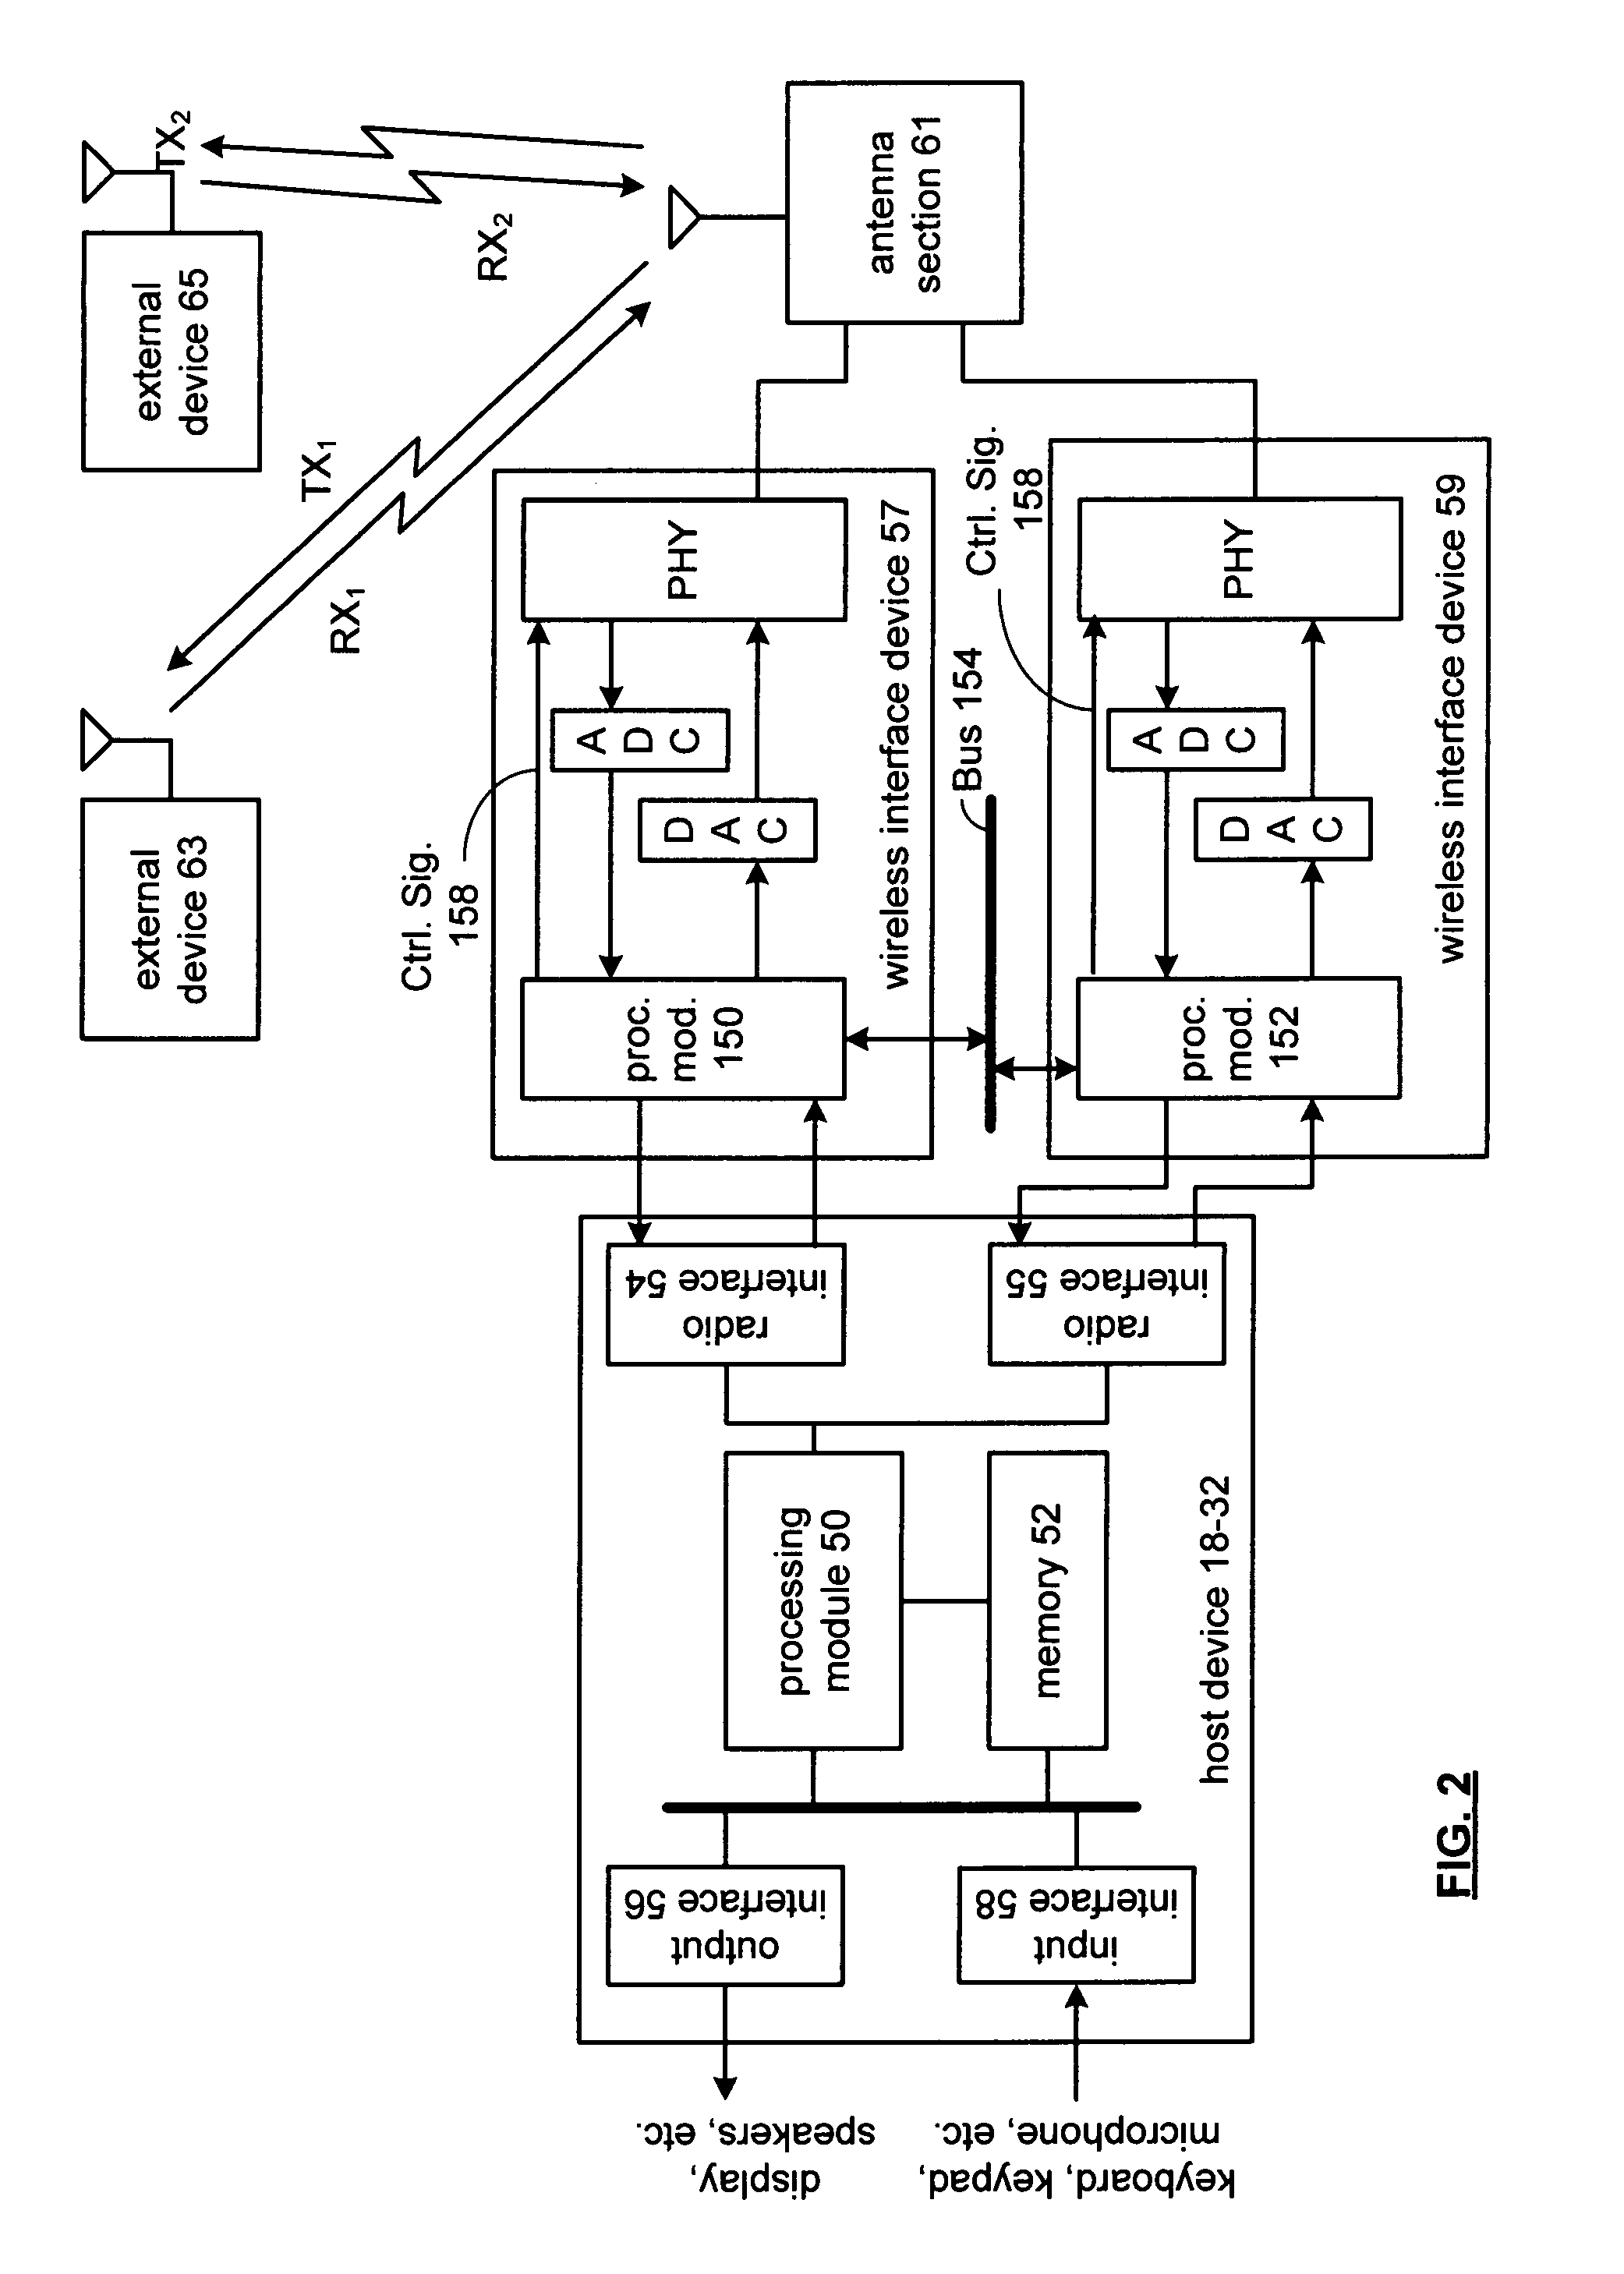 Cooperative transceiving between wireless interface devices of a host device with shared modules